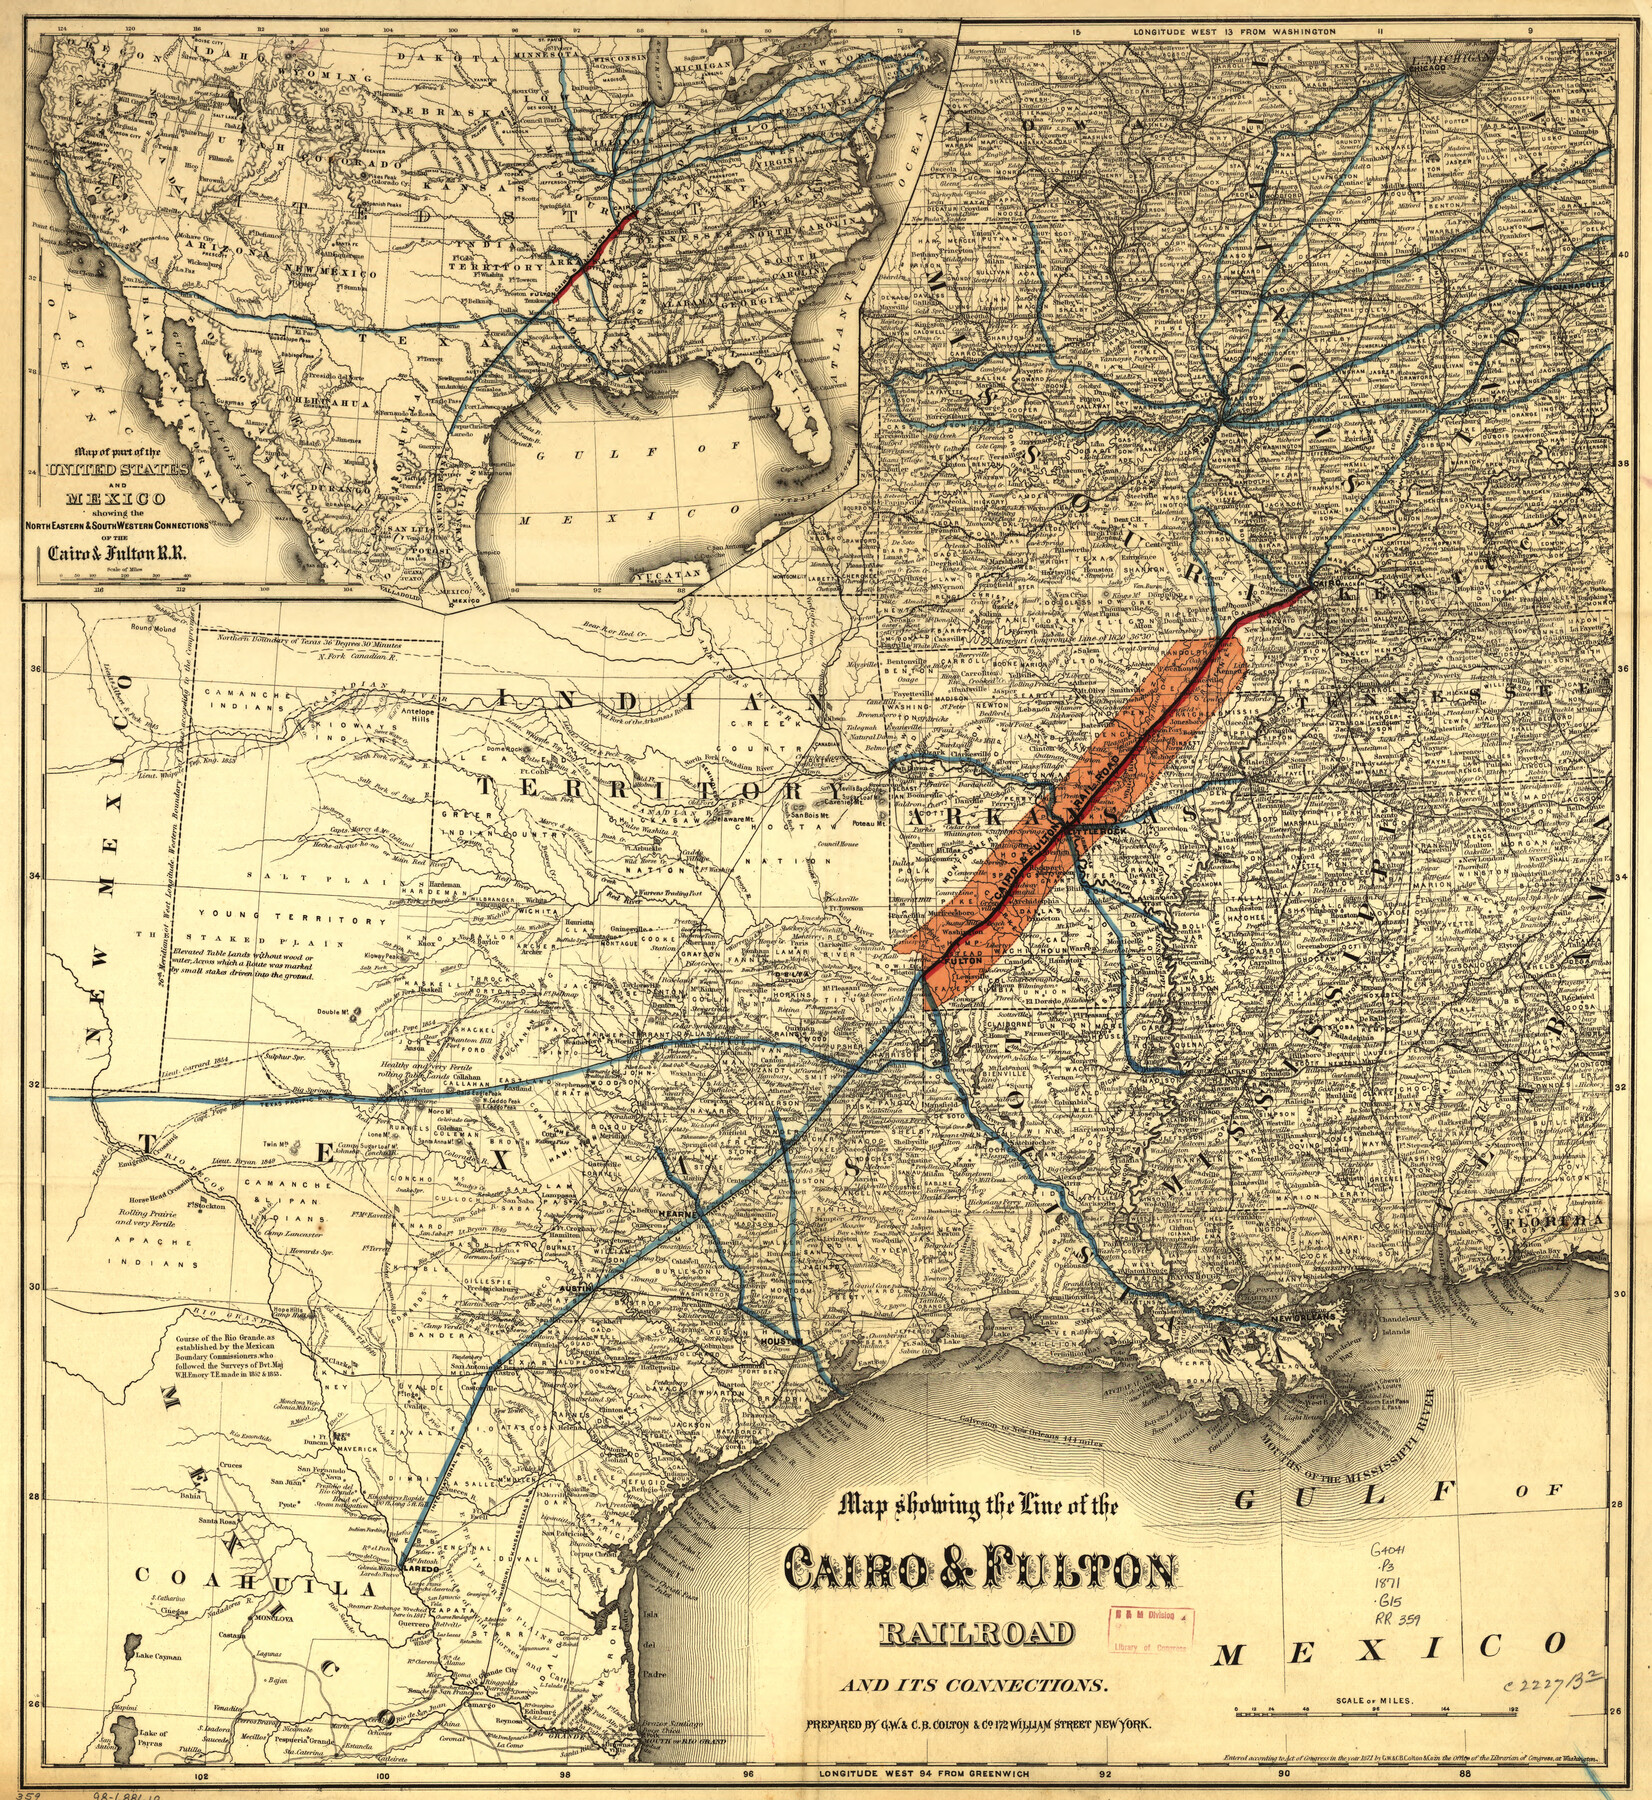 93611, Map showing the line of the Cairo & Fulton Railroad and its connections., Library of Congress